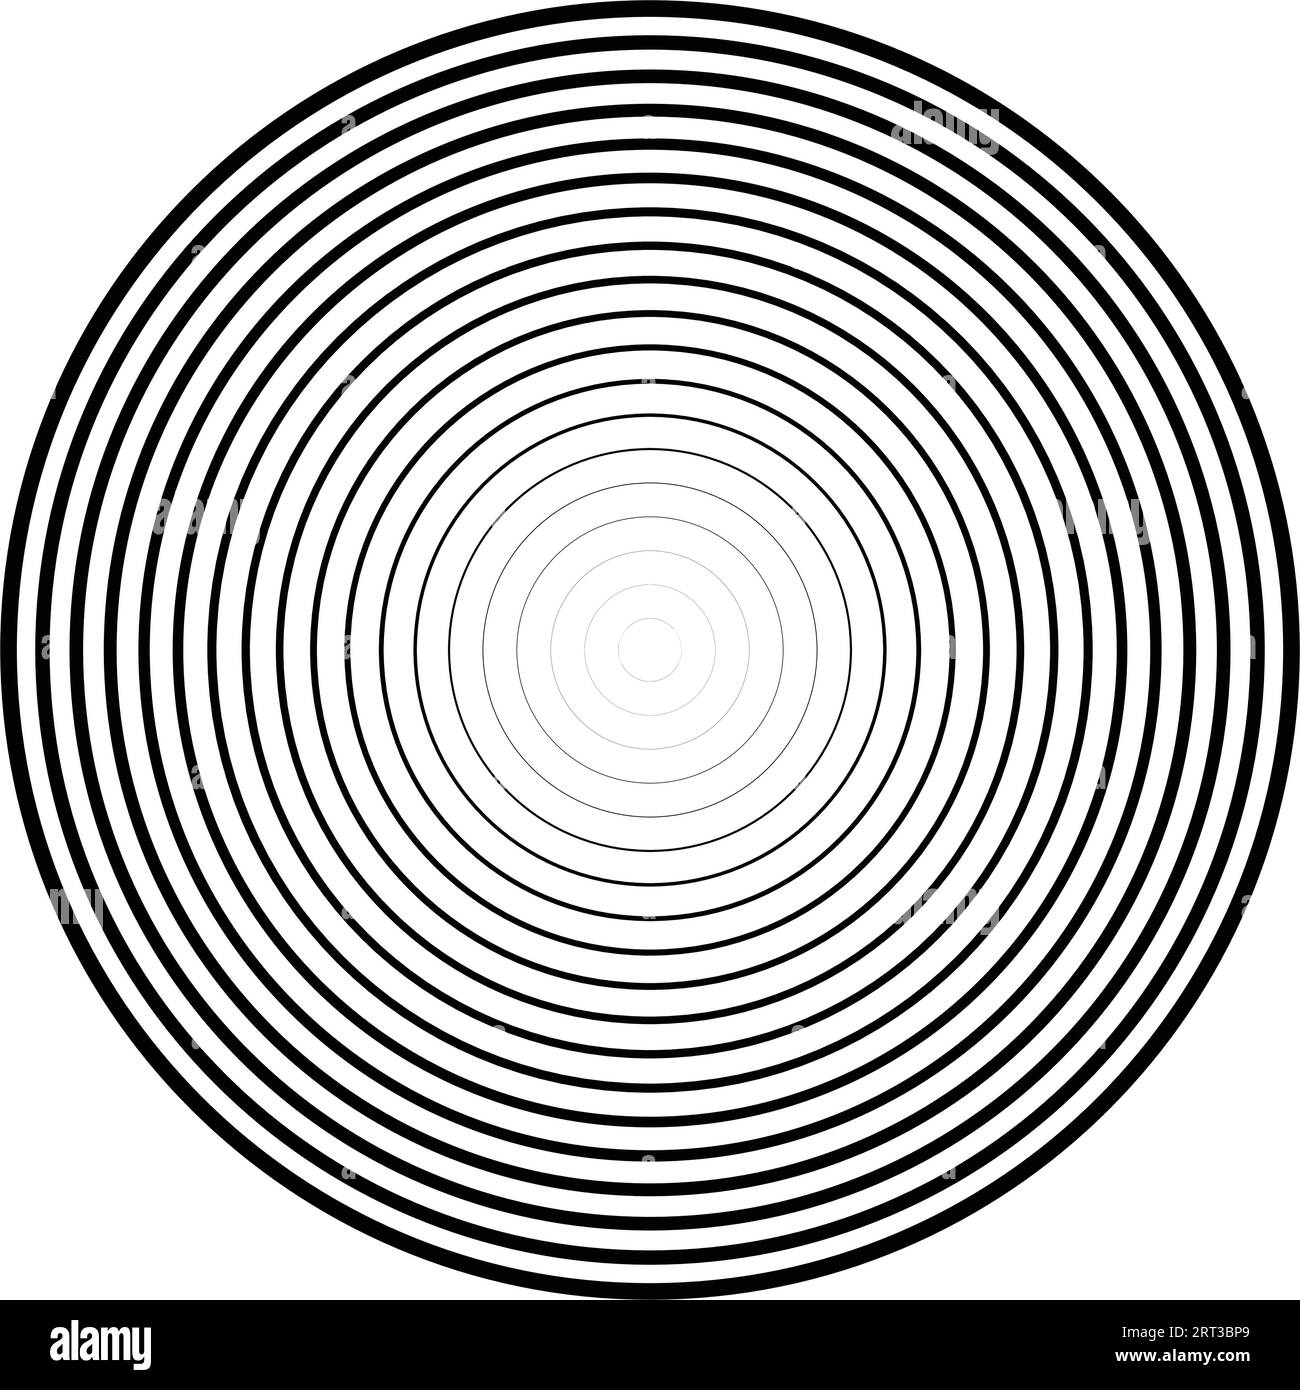 Concentric circle elements. Element for graphic web design, Template for print, textile, wrapping, decoration, Abstract art seamless pattern. Stock Vector